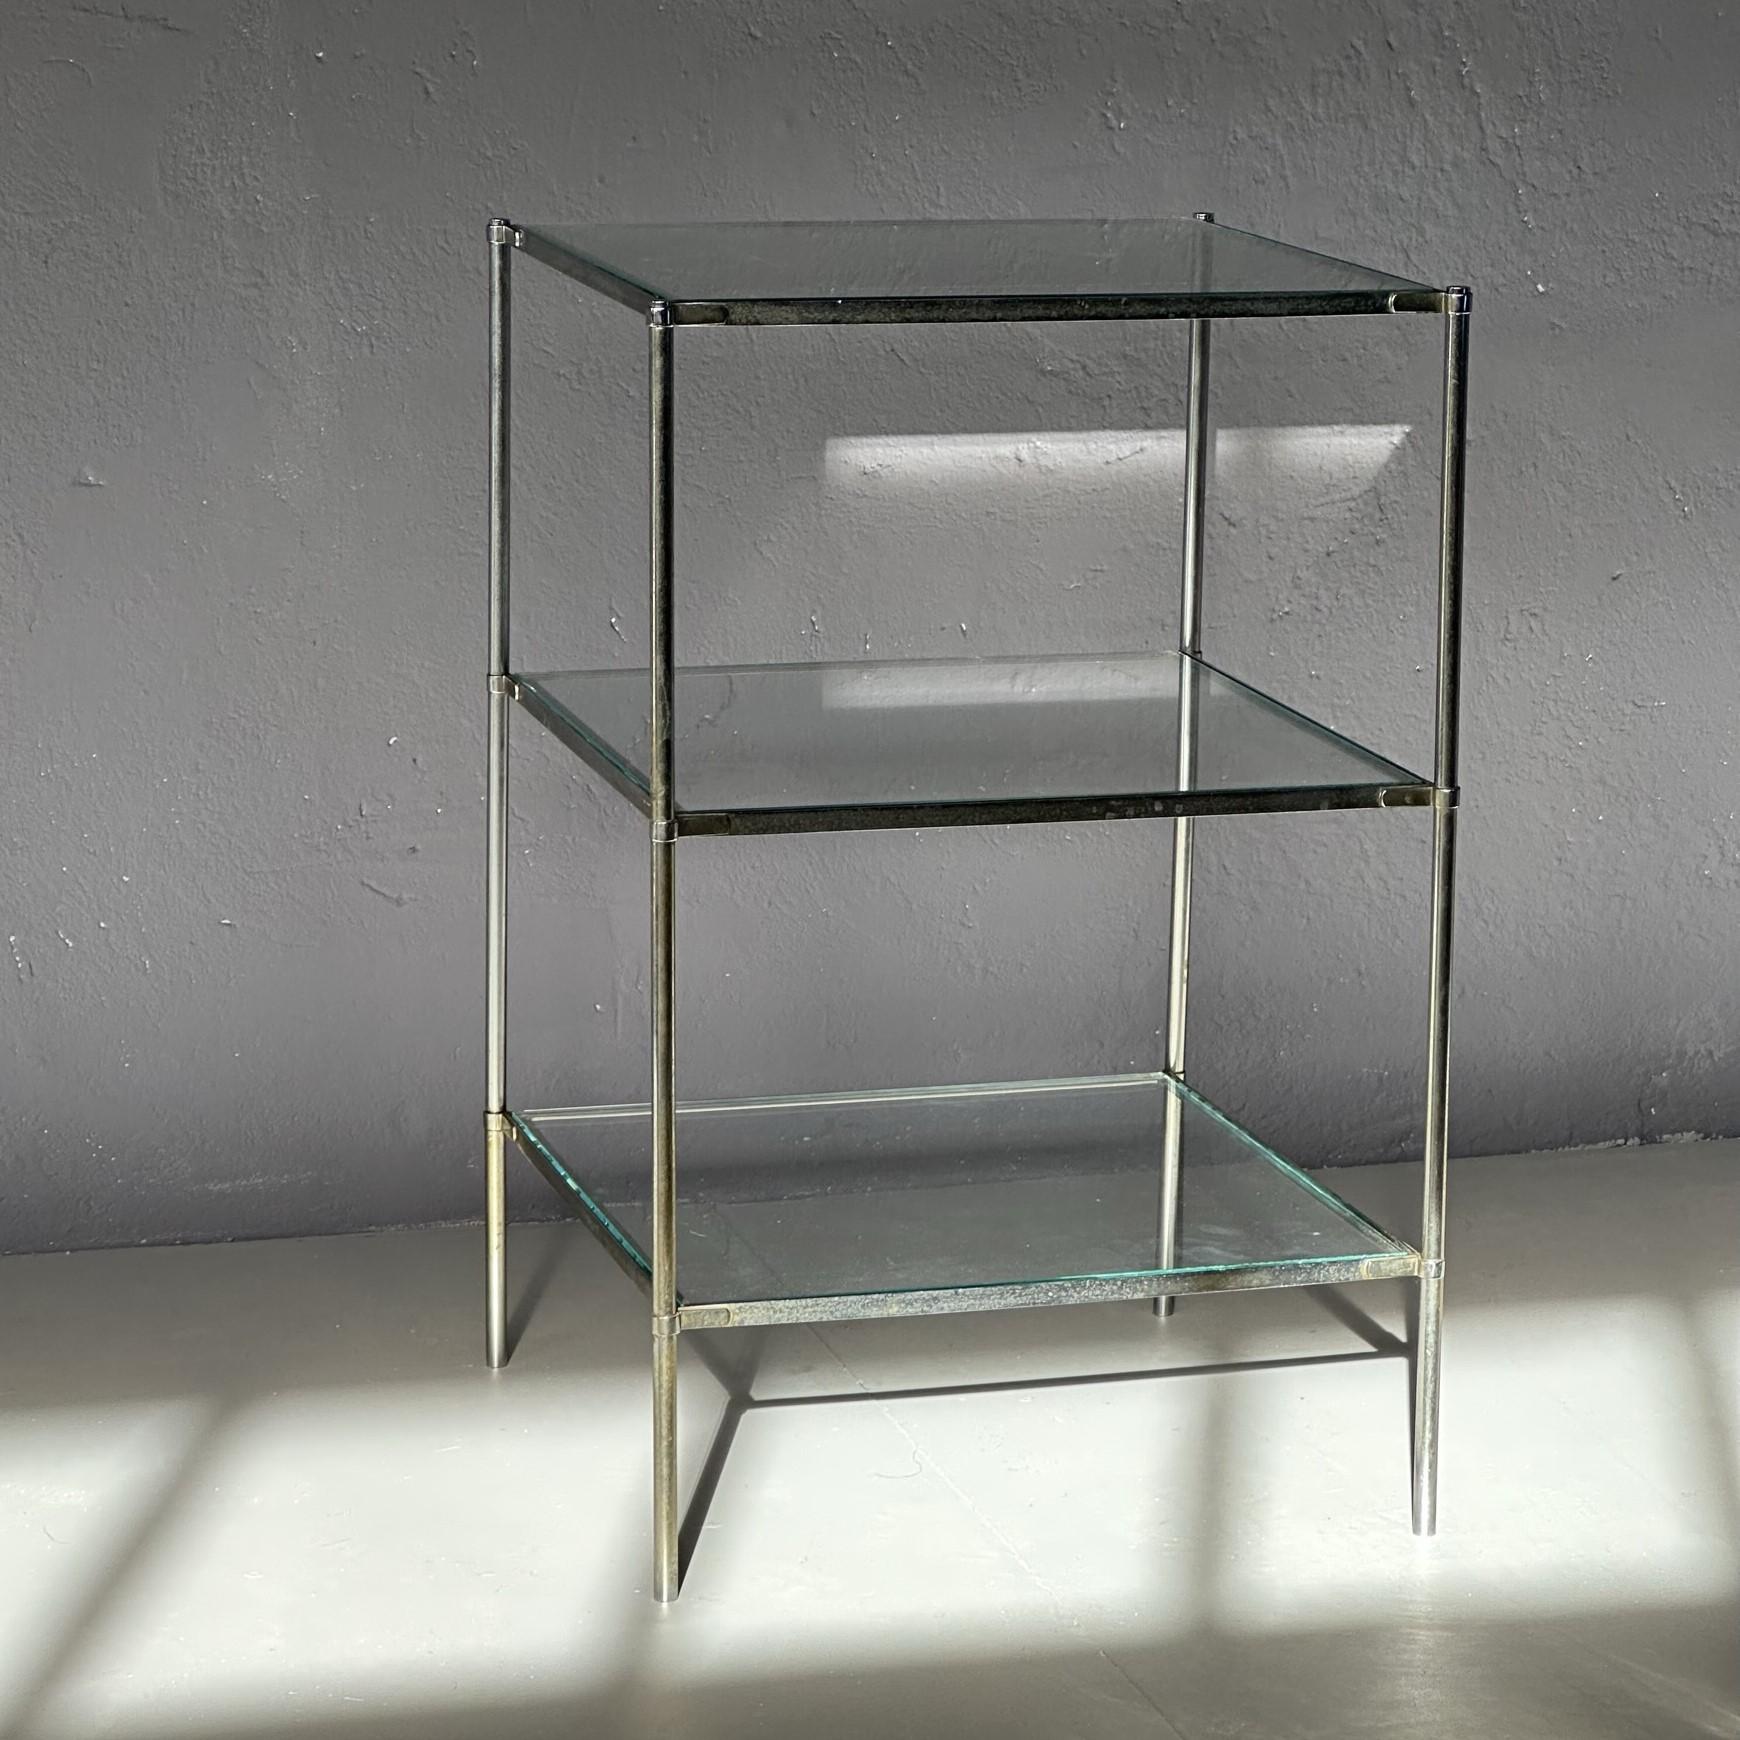 Coffee table model T12 Montecarl by Corrado Corradi dell'Acqua for Azucena, 1959.
Coffee table with 3 shelves and chromed metal structure.
On the metal it is possible to see traces relating to time